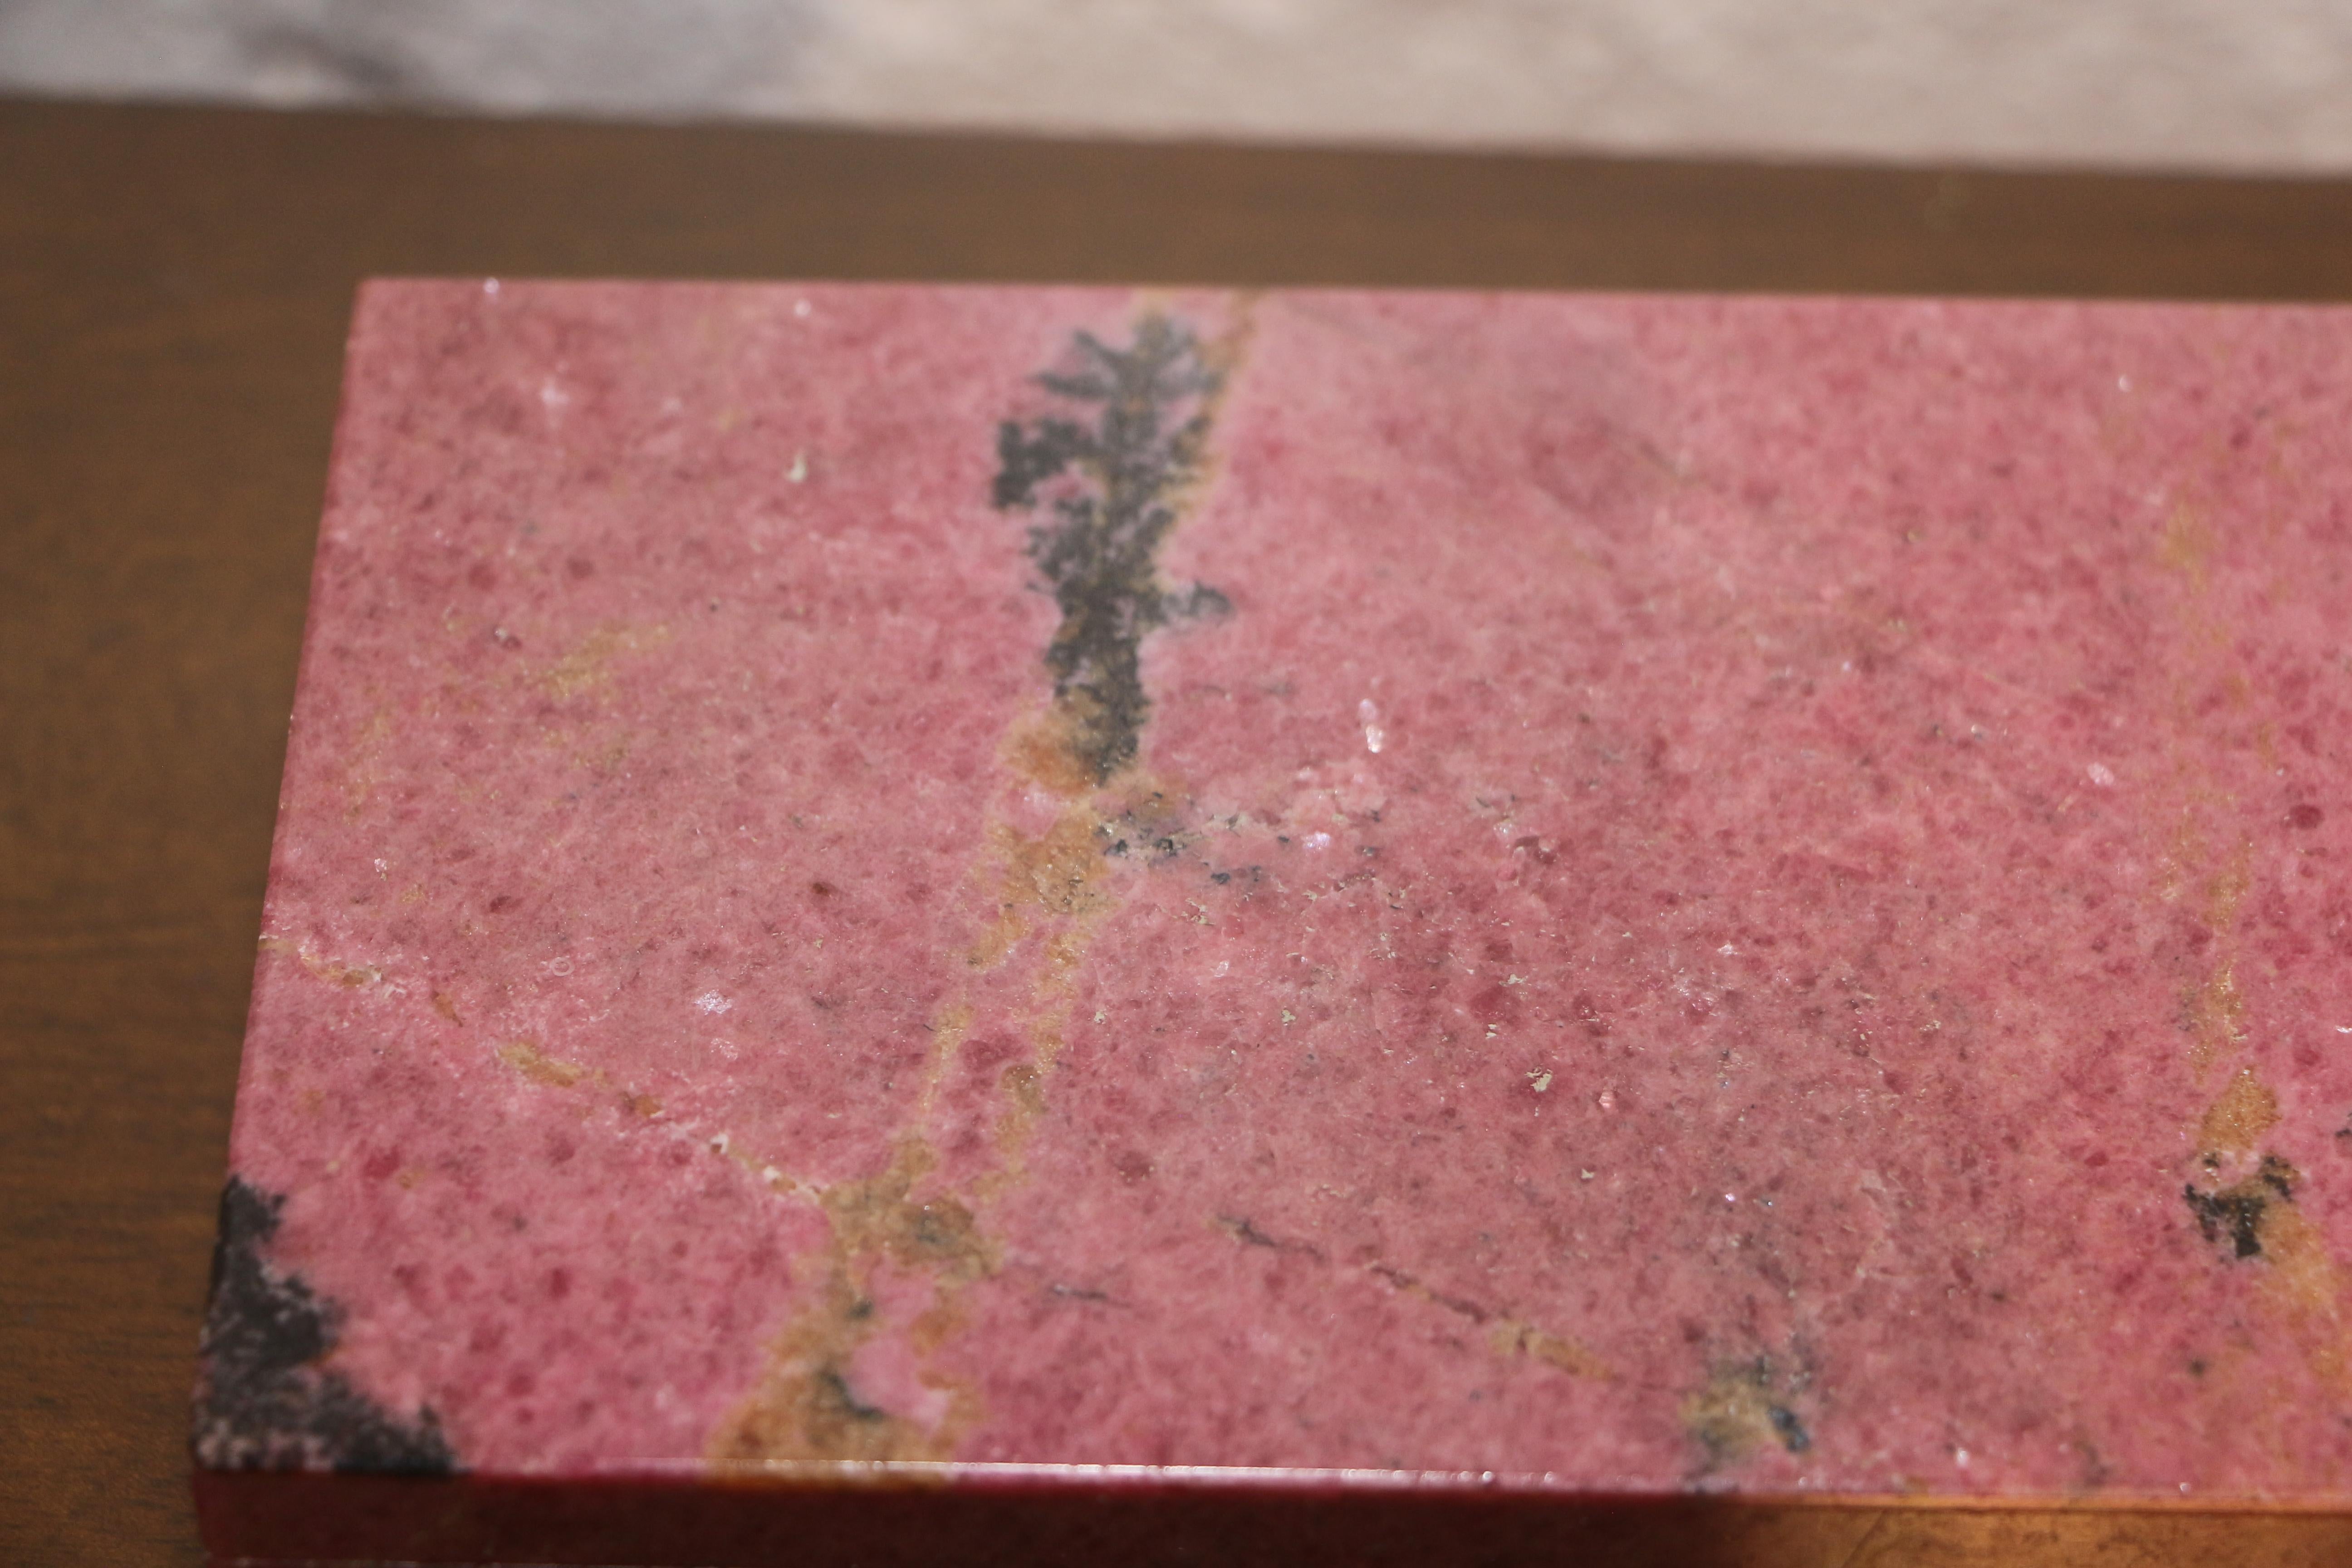 A beautiful box veneered in Rhodochrosite a somewhat rare mineral, used in many decorative forms including jewelry. This exquisite box is quite large for this mineral and measures approx 6x4 inches. it features a brass hinge and the inner box is